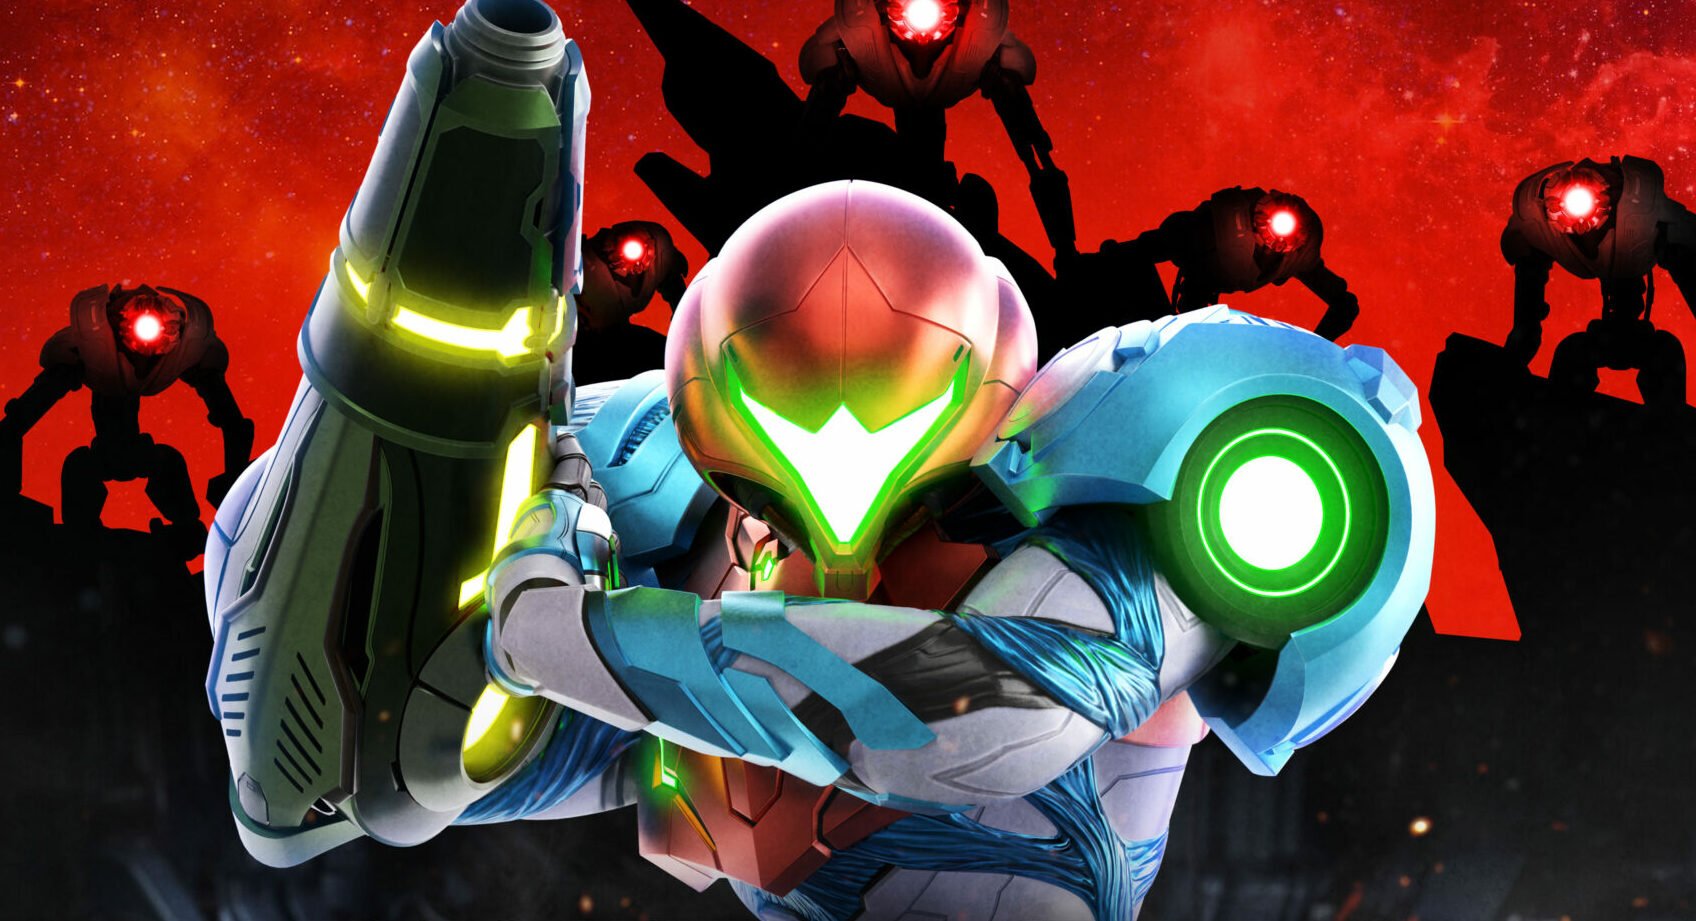 Metroid Dread developer working on new 2D Metroid claims source